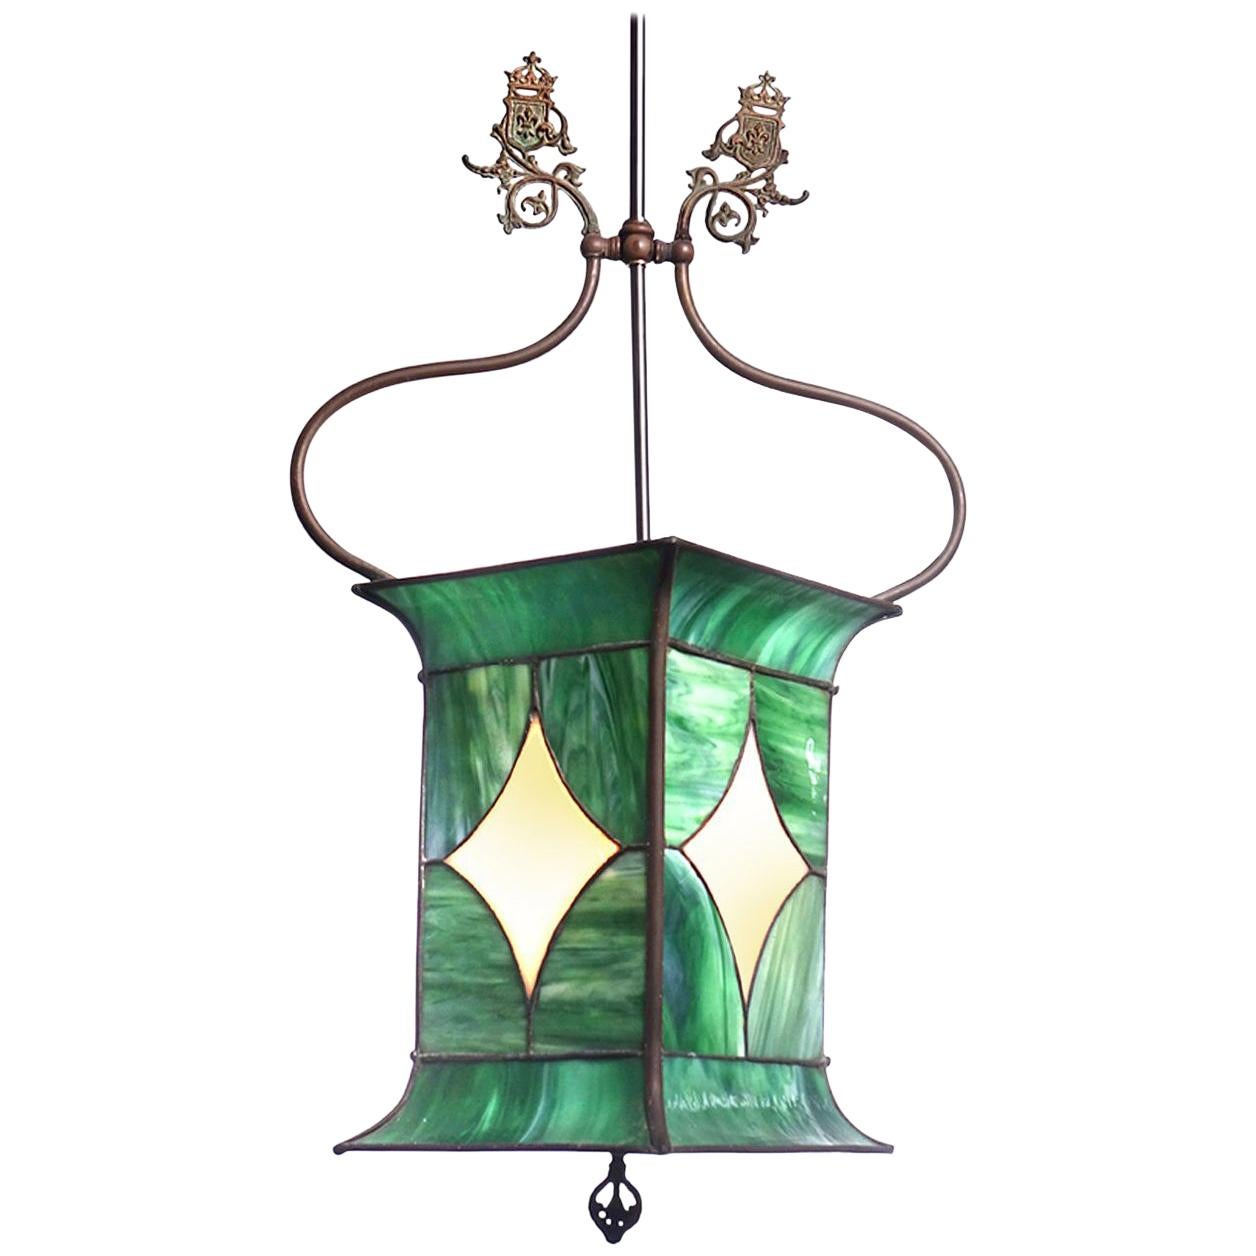 Early Leaded Glass Gas Lamp